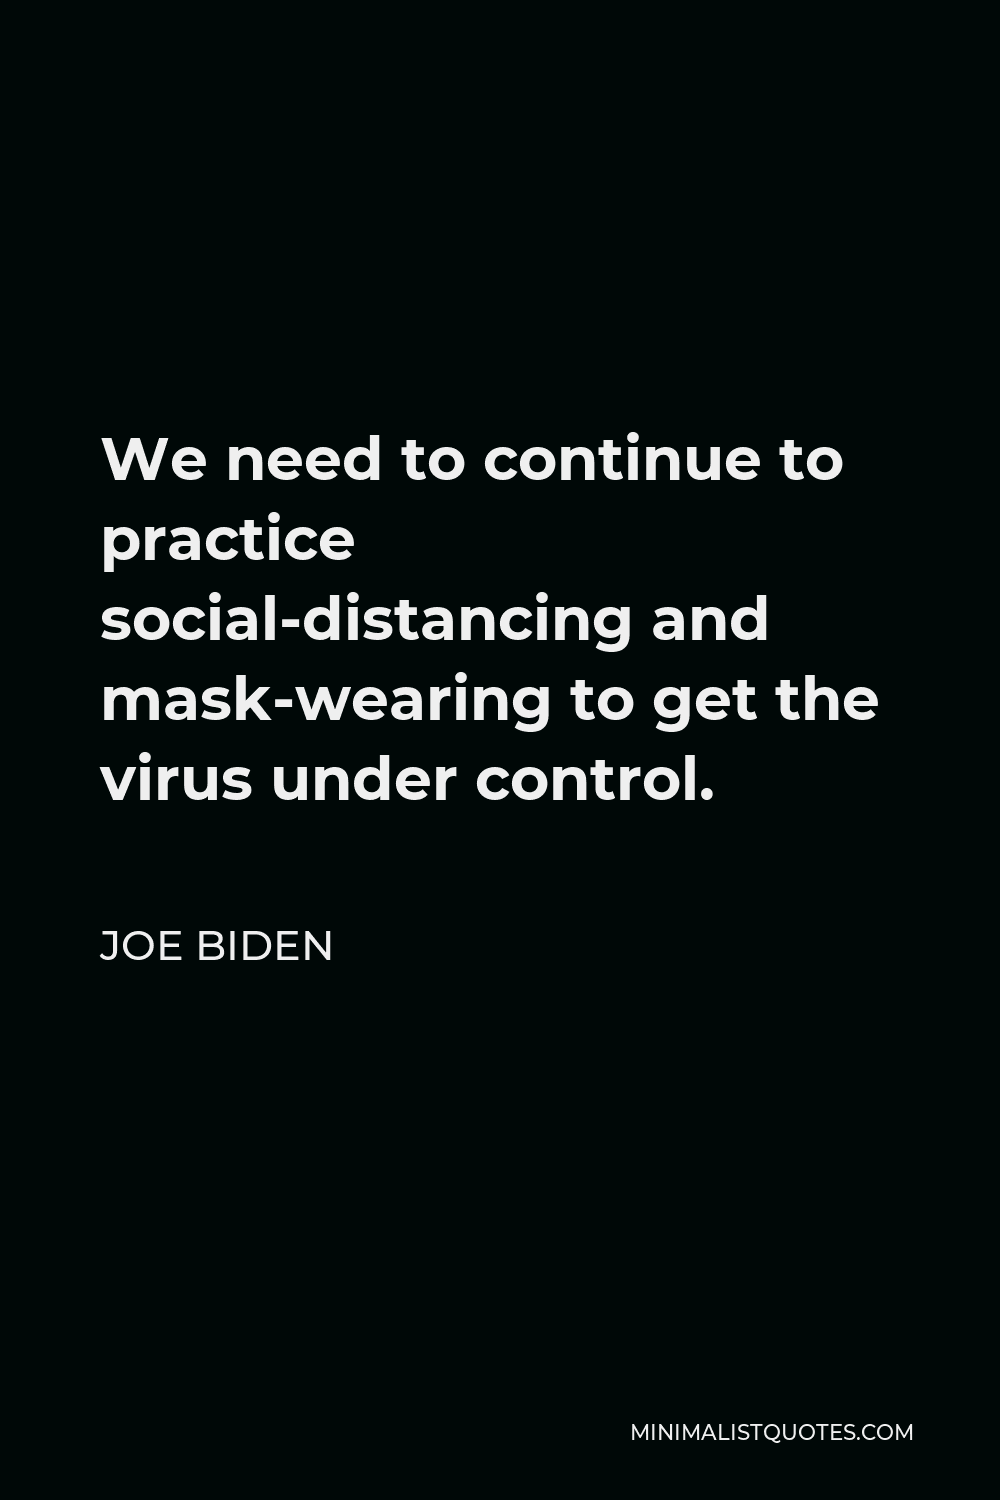 Joe Biden Quote - We need to continue to practice social-distancing and mask-wearing to get the virus under control.